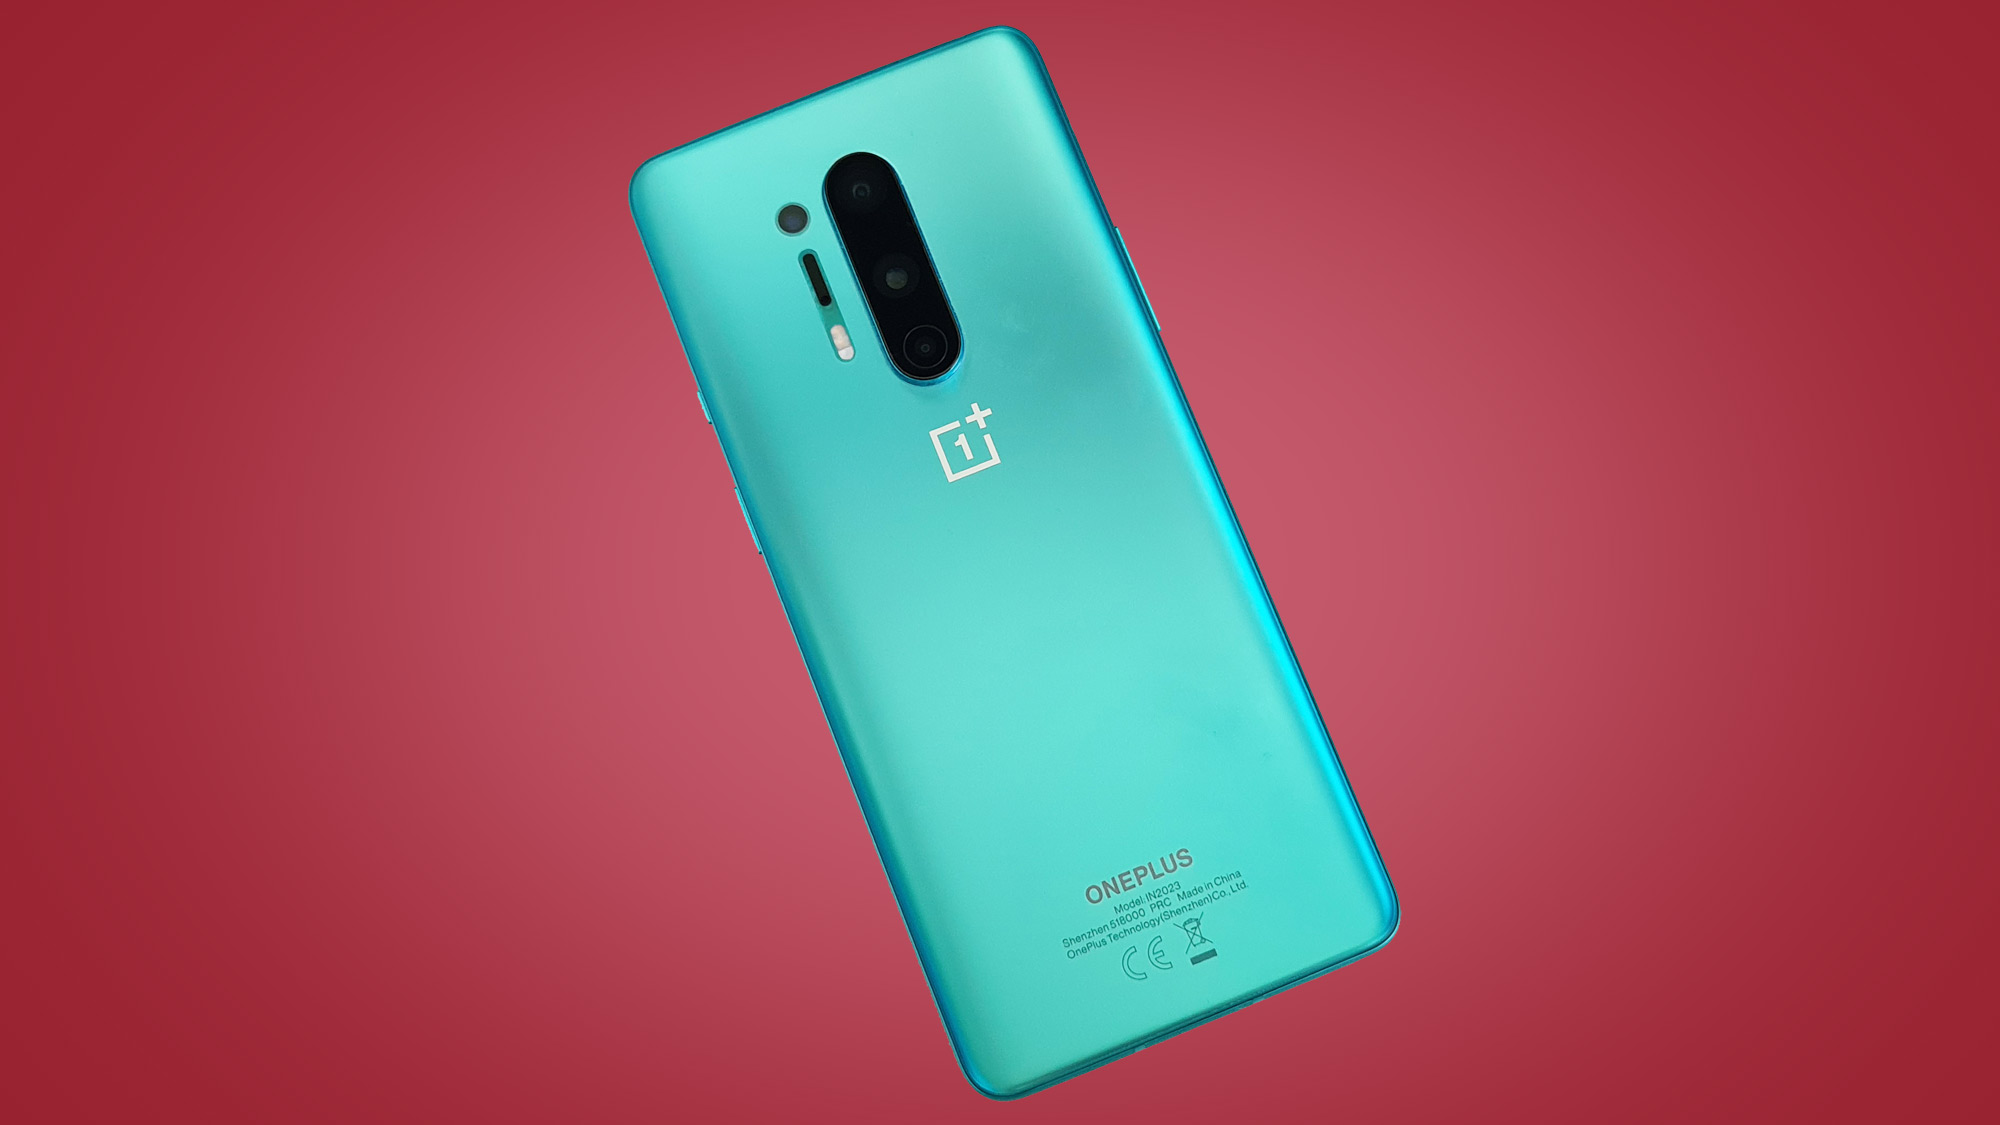 OnePlus 8 is now available to buy, with perhaps a free goodie thrown in too